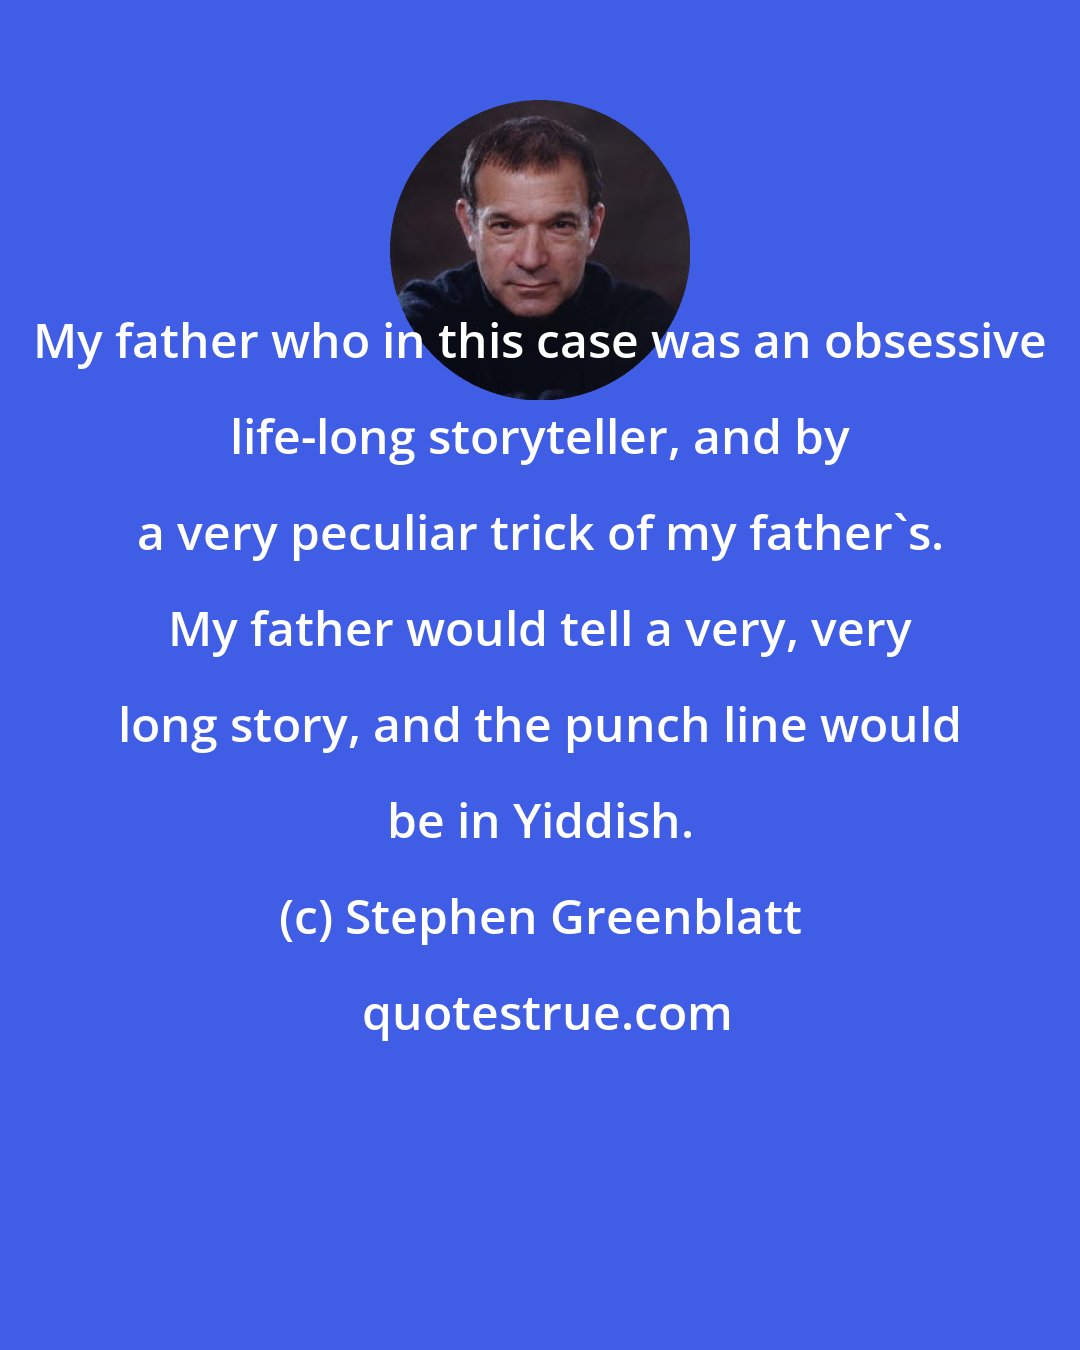 Stephen Greenblatt: My father who in this case was an obsessive life-long storyteller, and by a very peculiar trick of my father's. My father would tell a very, very long story, and the punch line would be in Yiddish.